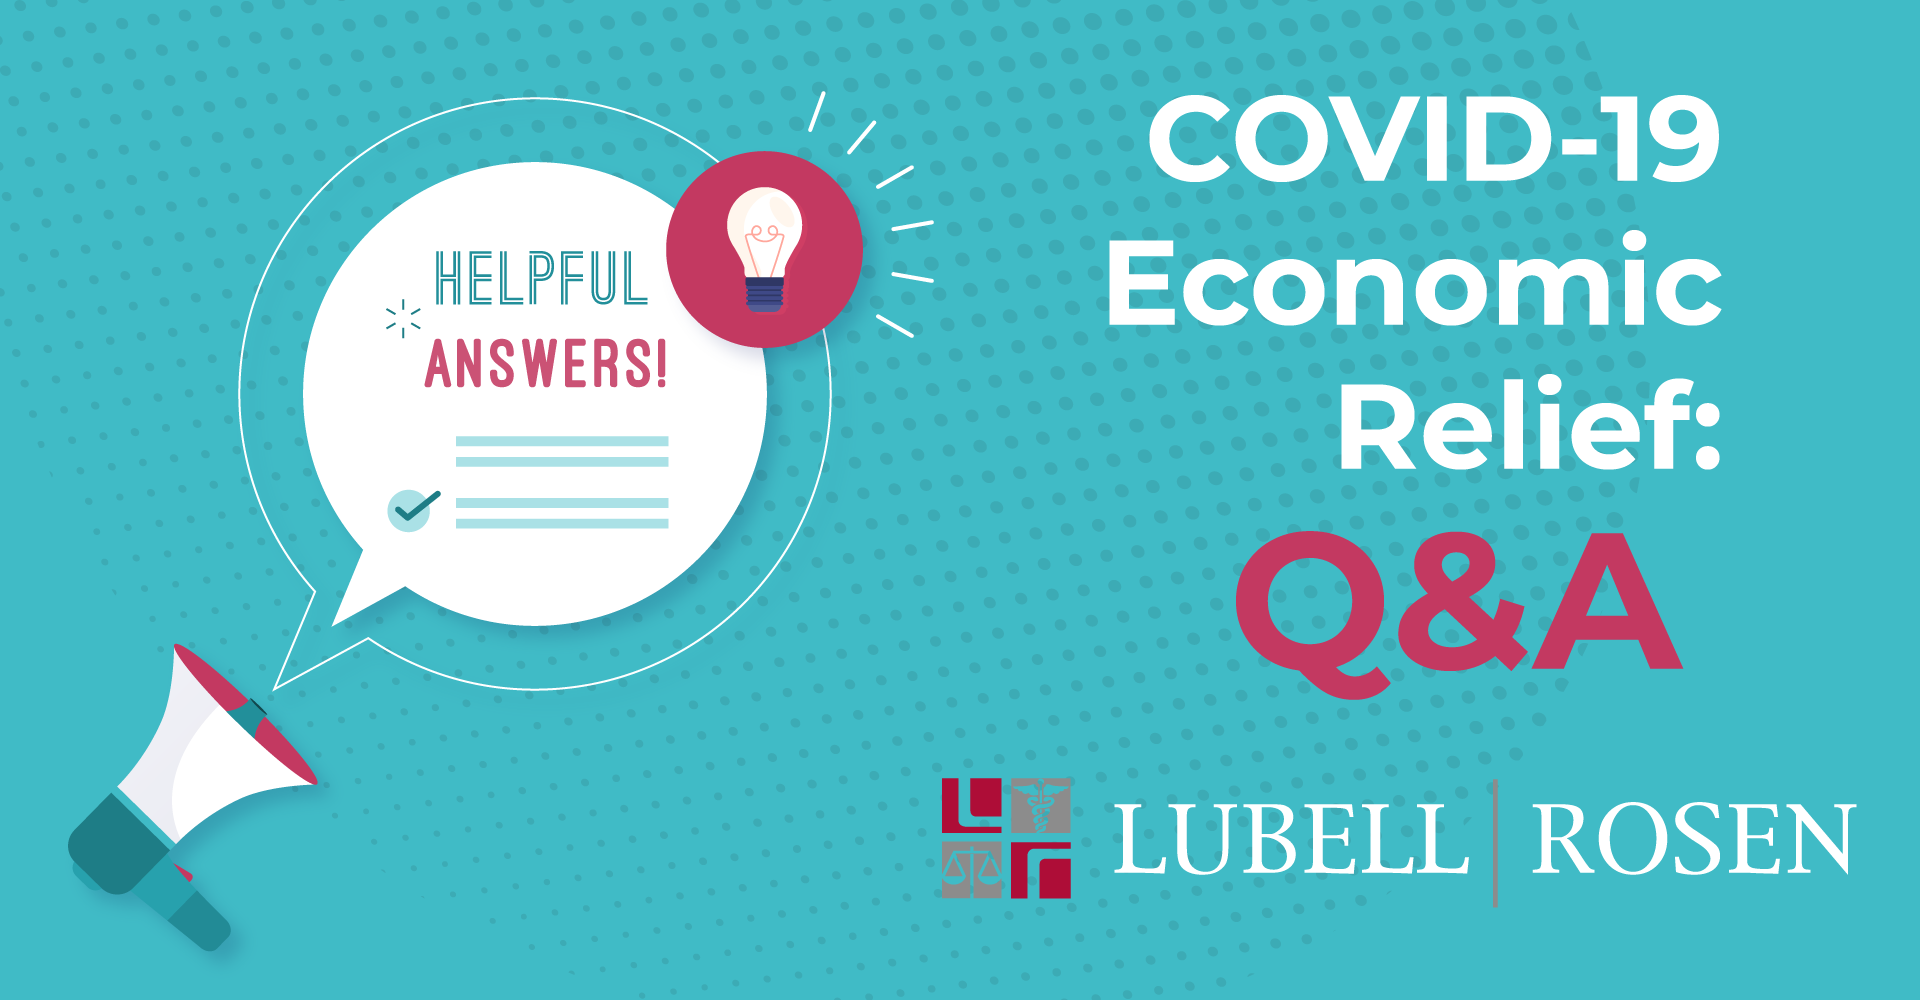 Lubell Rosen Covid-19 Economic Relief: Q&A Banner